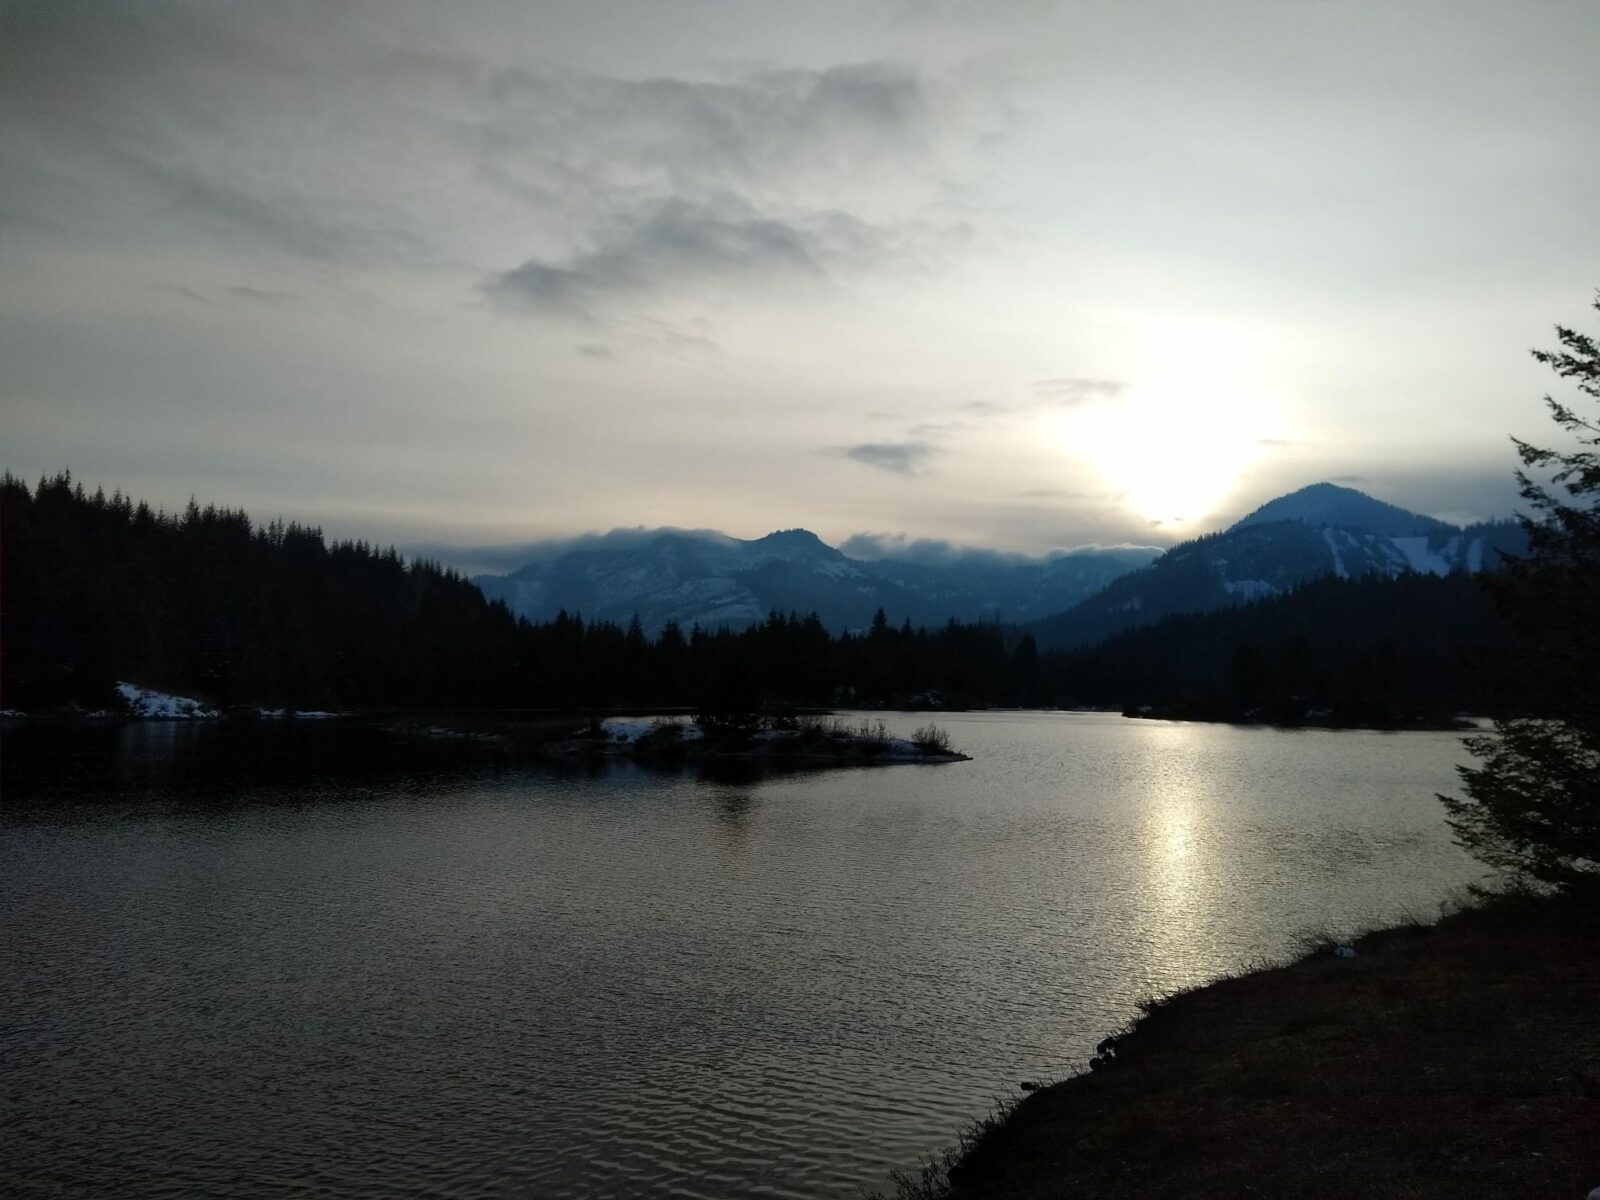 A winter sun sets on a day with high overcast behind a mountain near gold creek pond. The pond is surrounded by forest and forested mountains in the distance